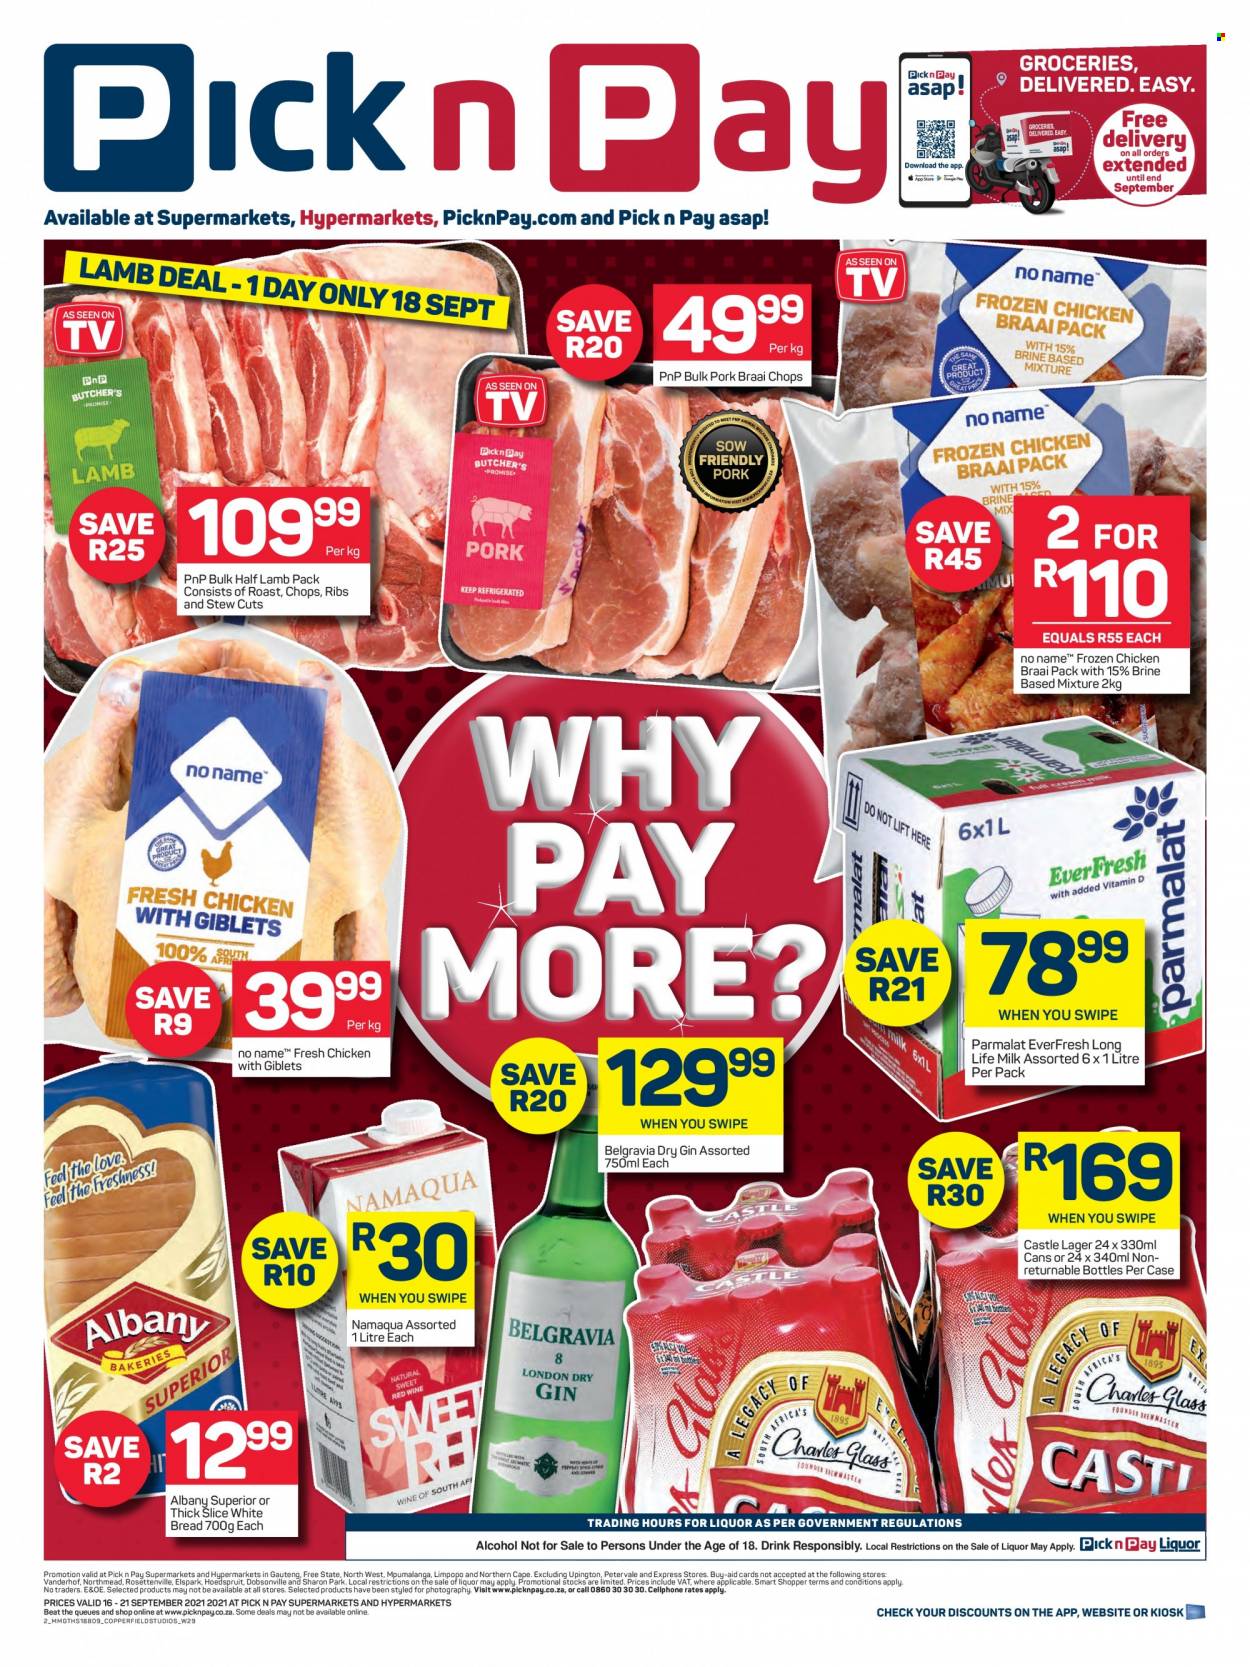 Pick n Pay specials - 09.16.2021 - 09.21.2021. 